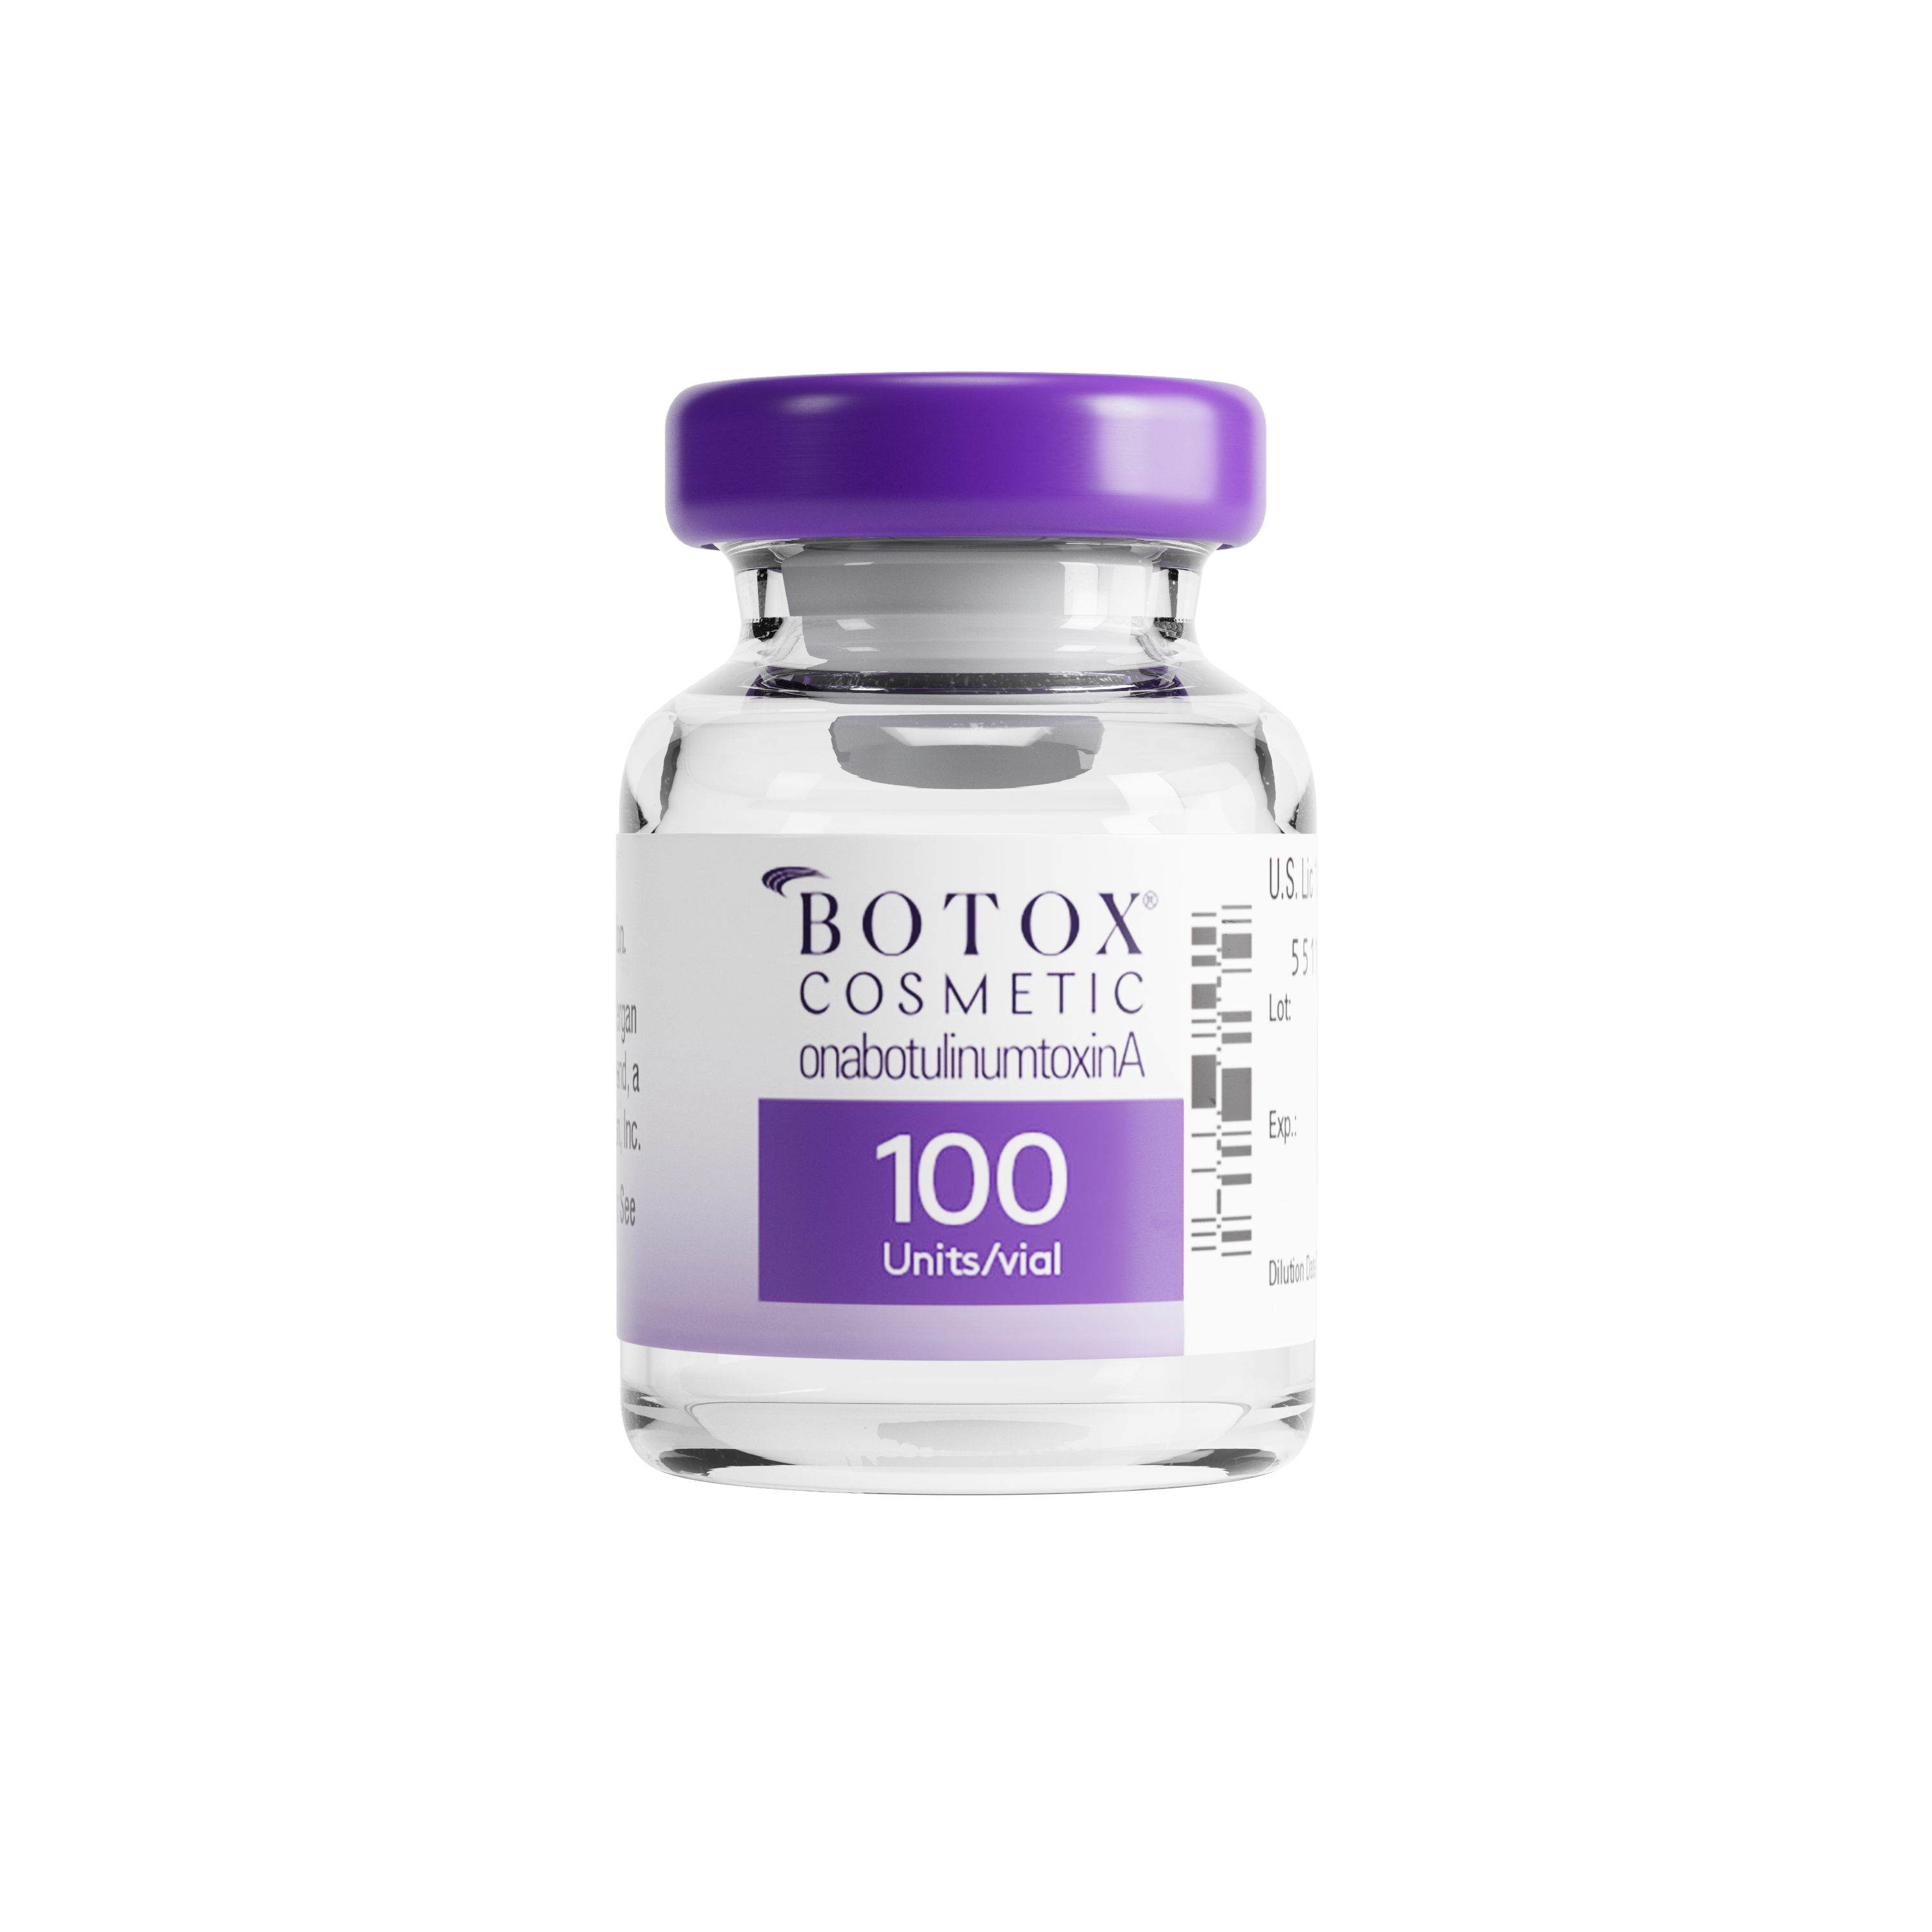 Botox 100unit Cosmetic Vial for Injectable Neurotoxin Treatment to Wrinkles